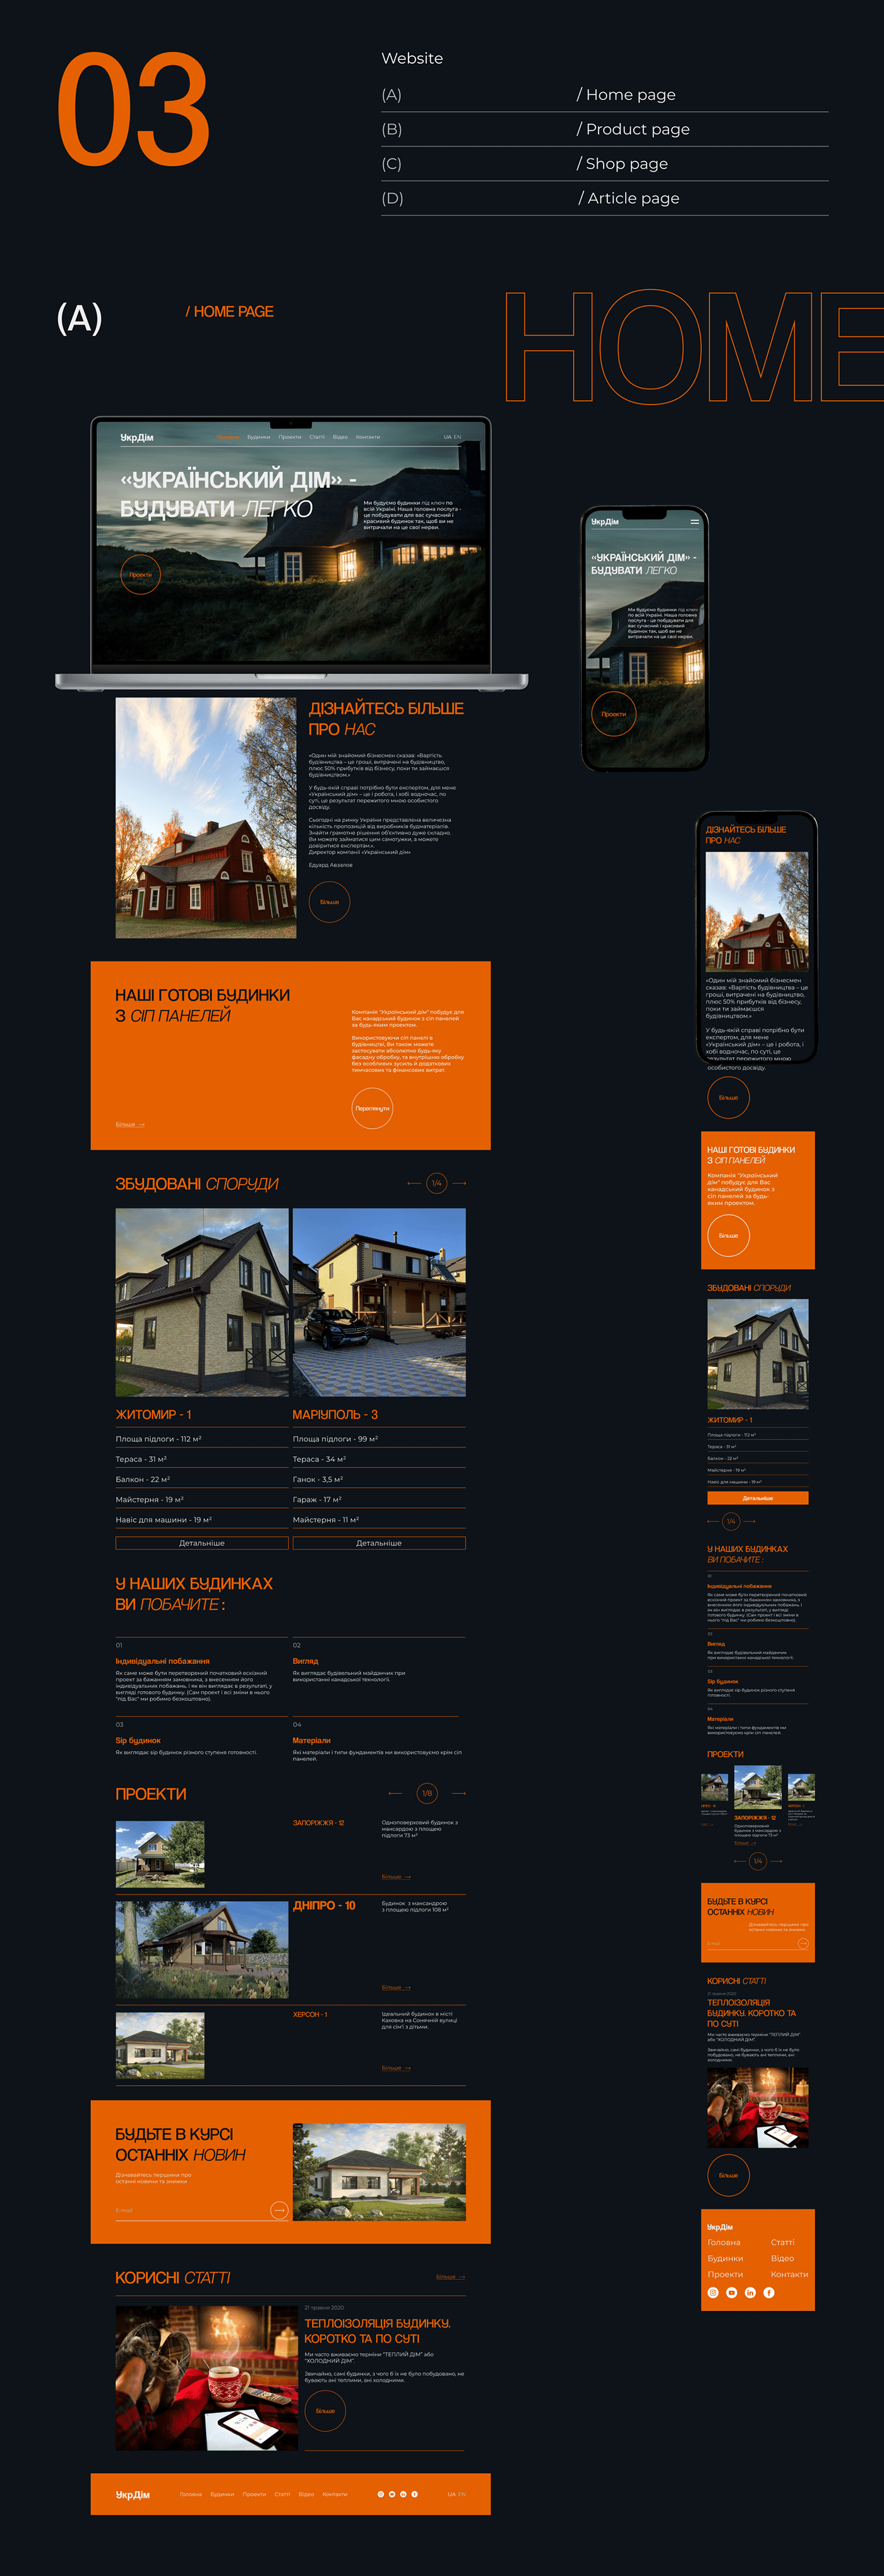 design redesign redesign concept ux/ui UX design Figma construction company house multi-page